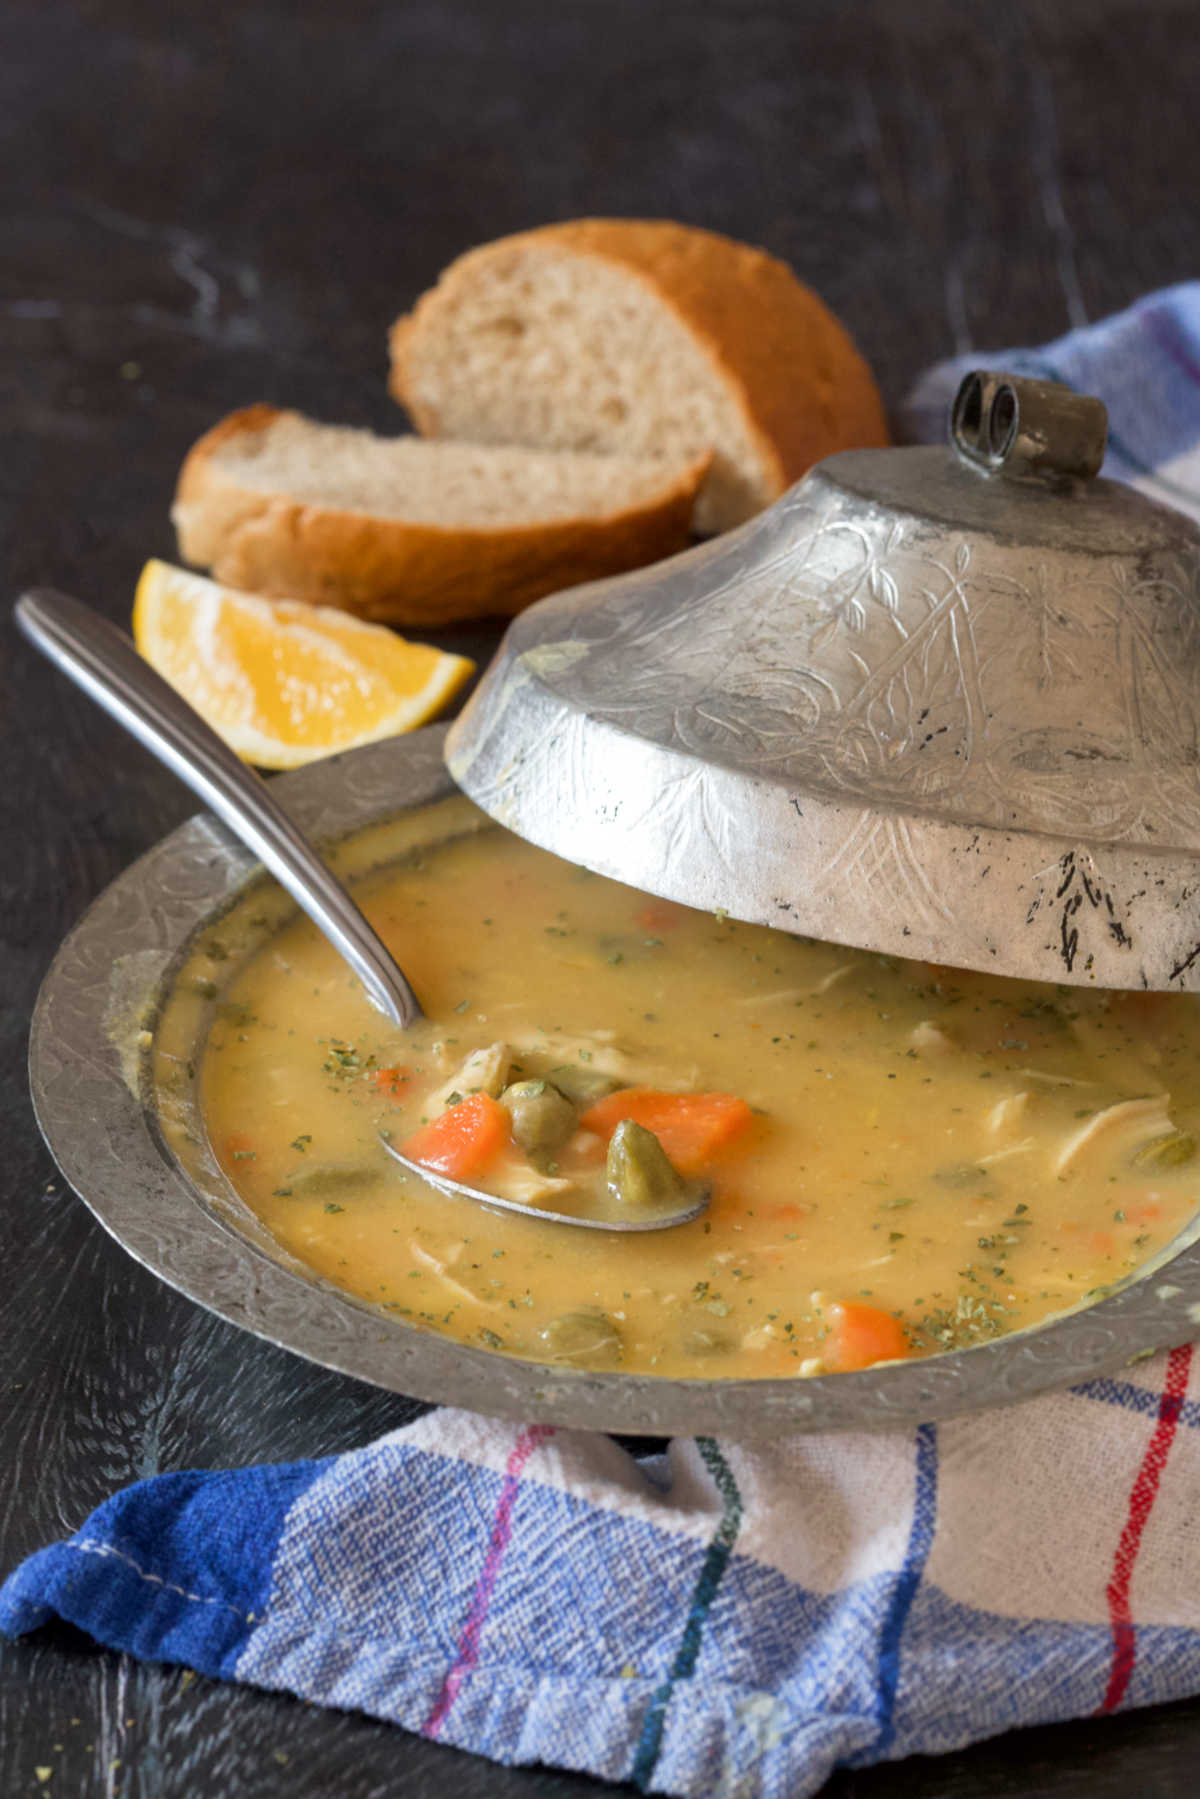 Soup in a silver bowl with a lid, a kitchen cloth, two slices of bread, a lemon wedge and a spoon.